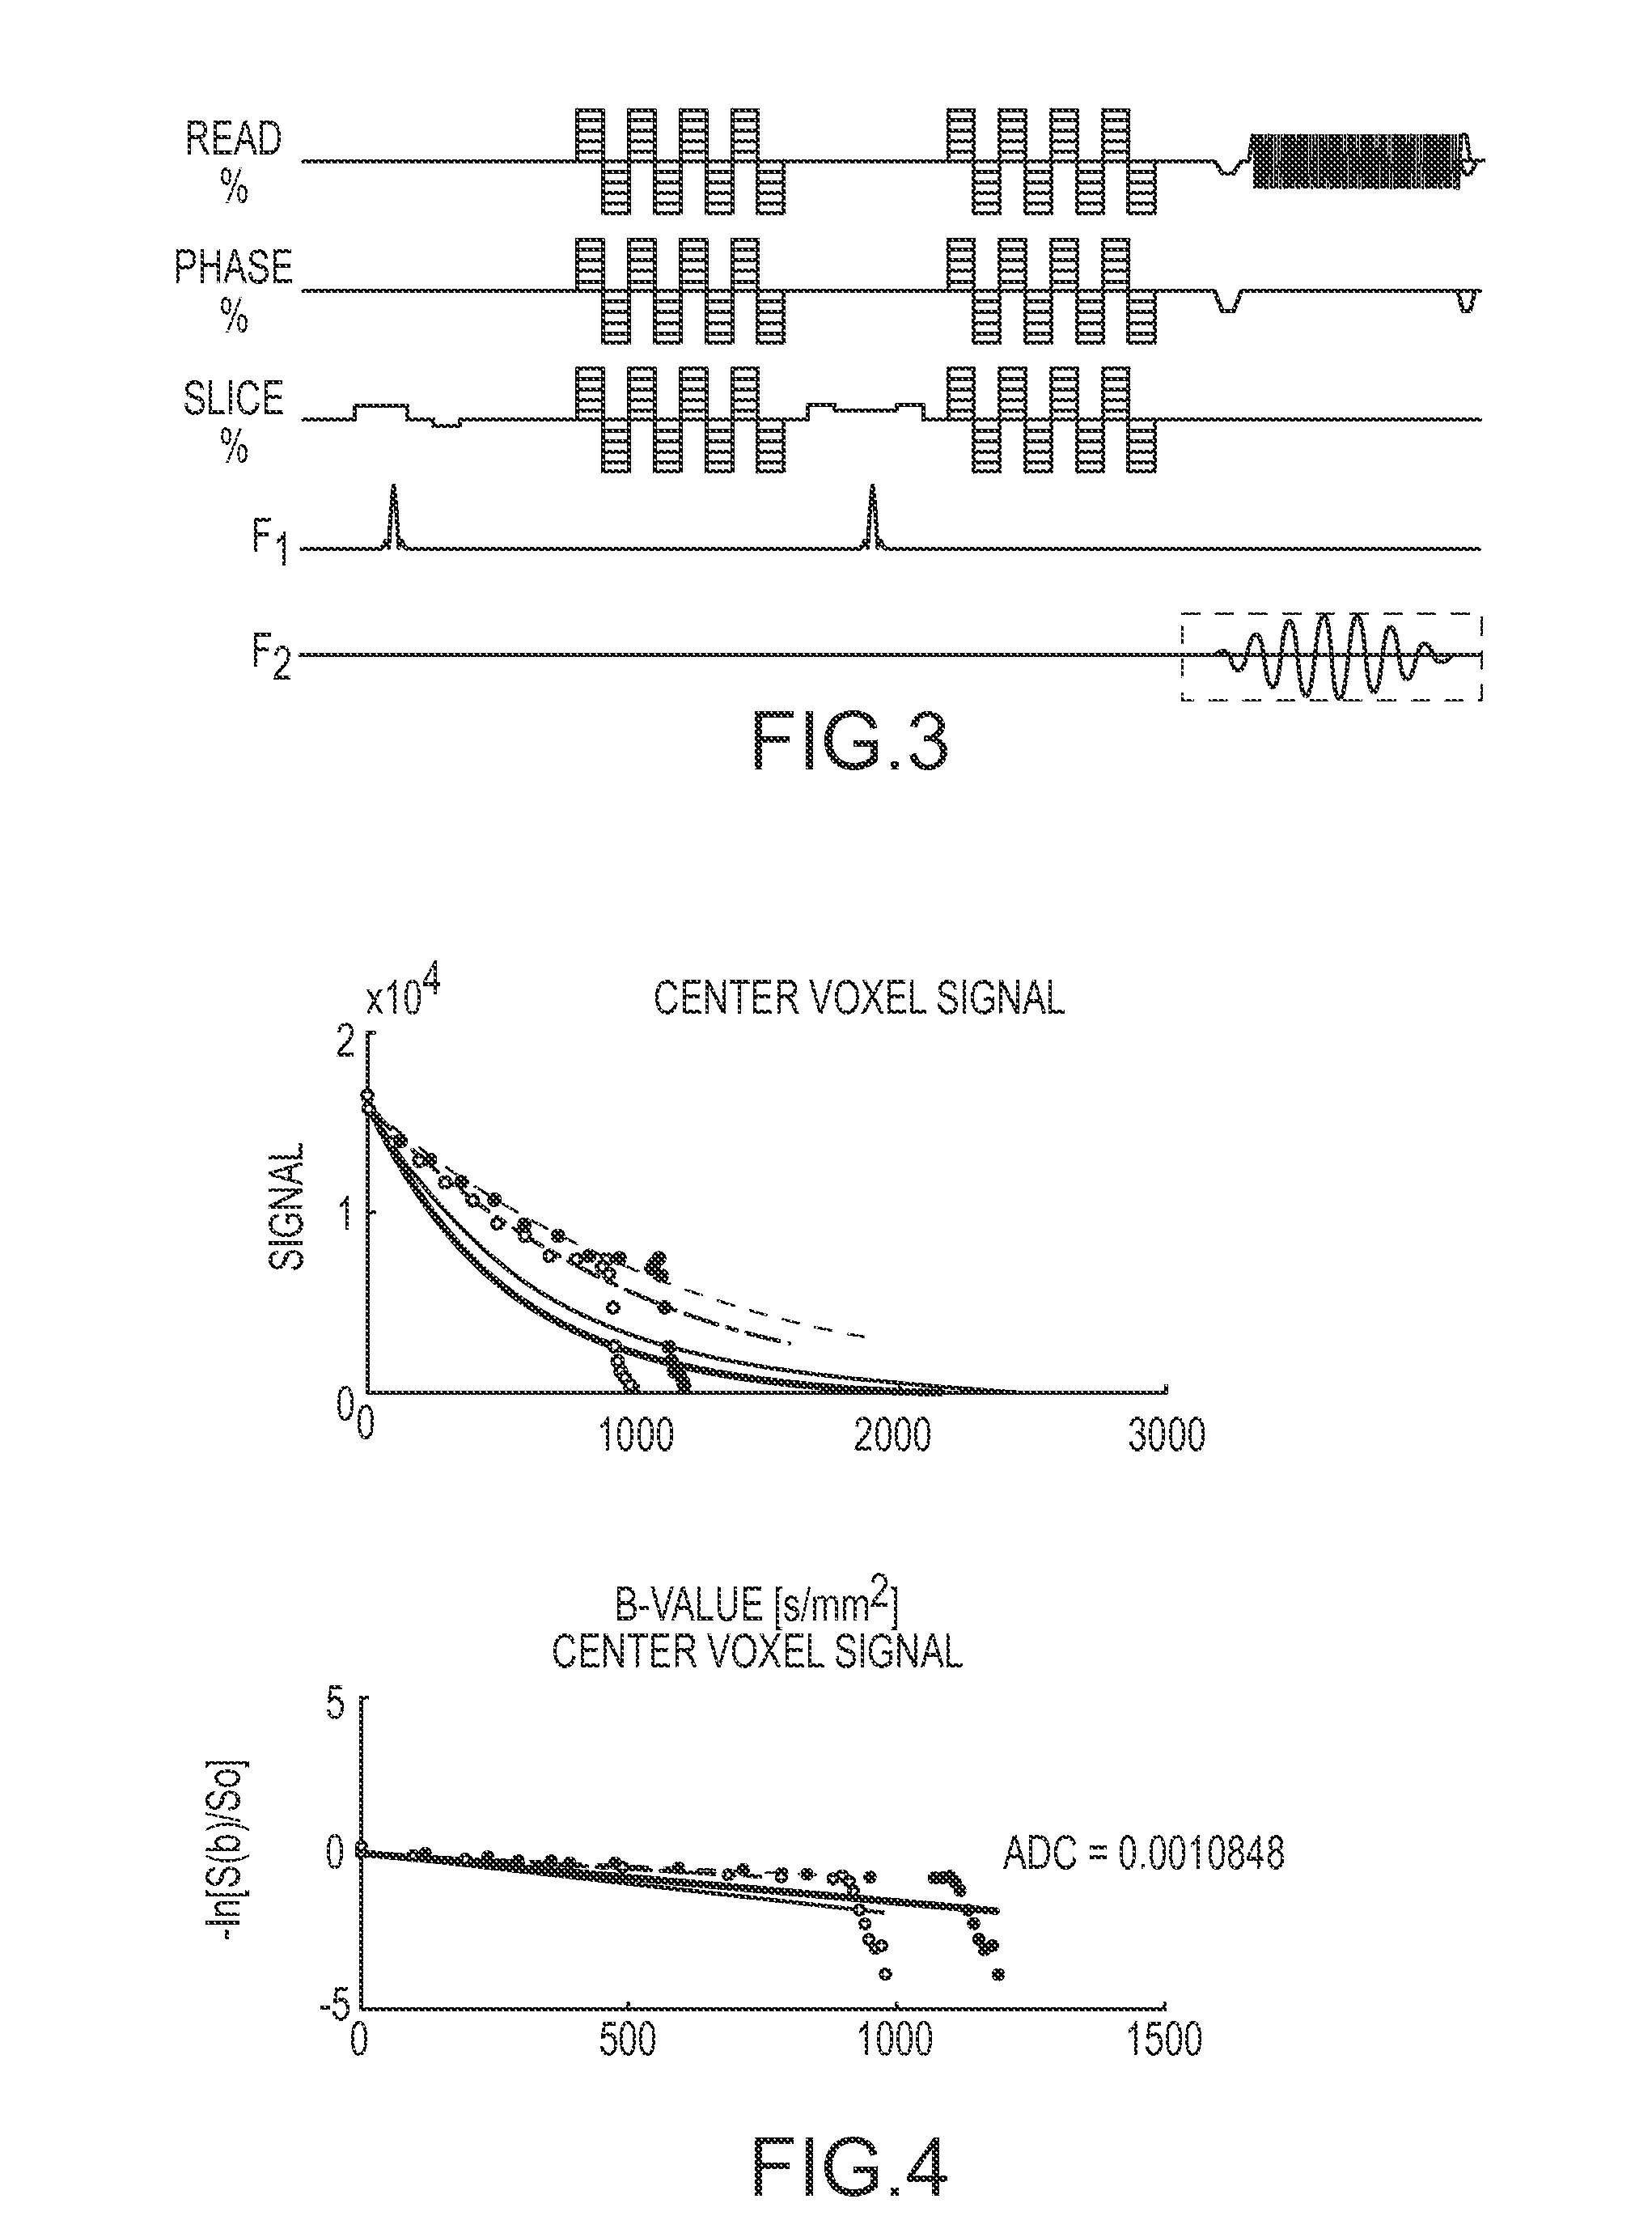 Method for detecting tumor cell invasion using short diffusion times